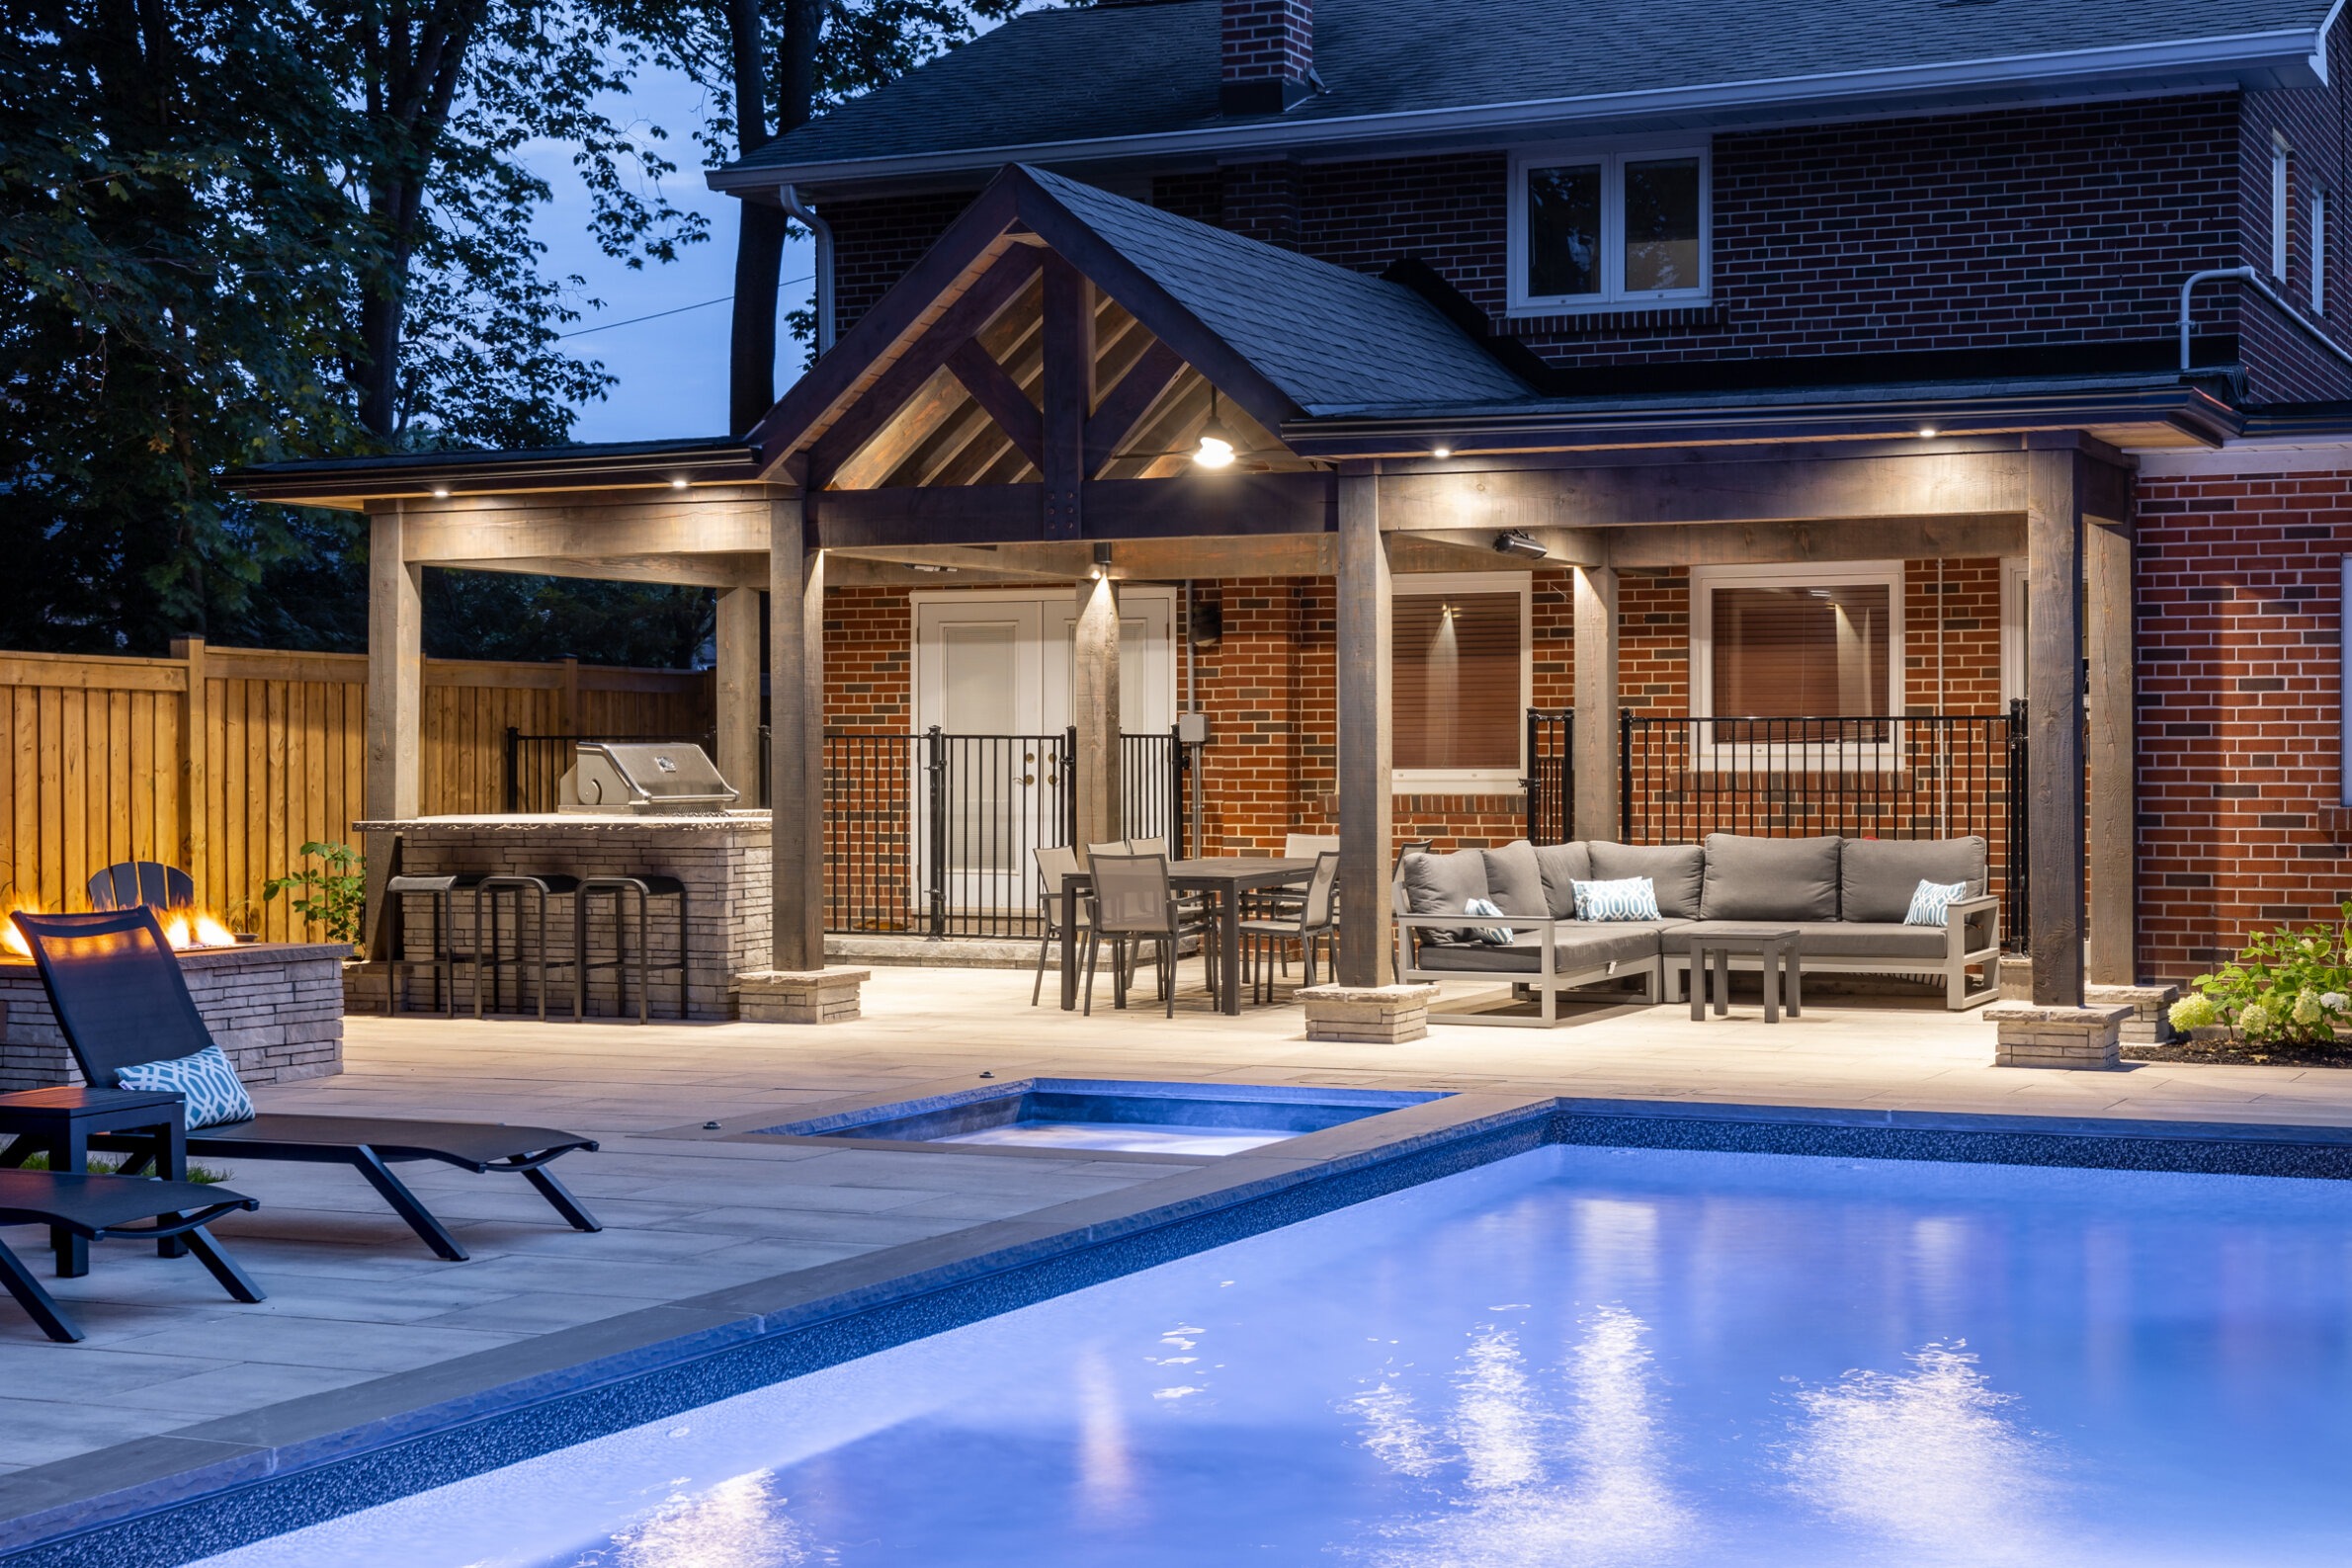 An outdoor residential space at dusk featuring a swimming pool, lit fire pit, lounge area, and a built-in grill beneath a covered patio.